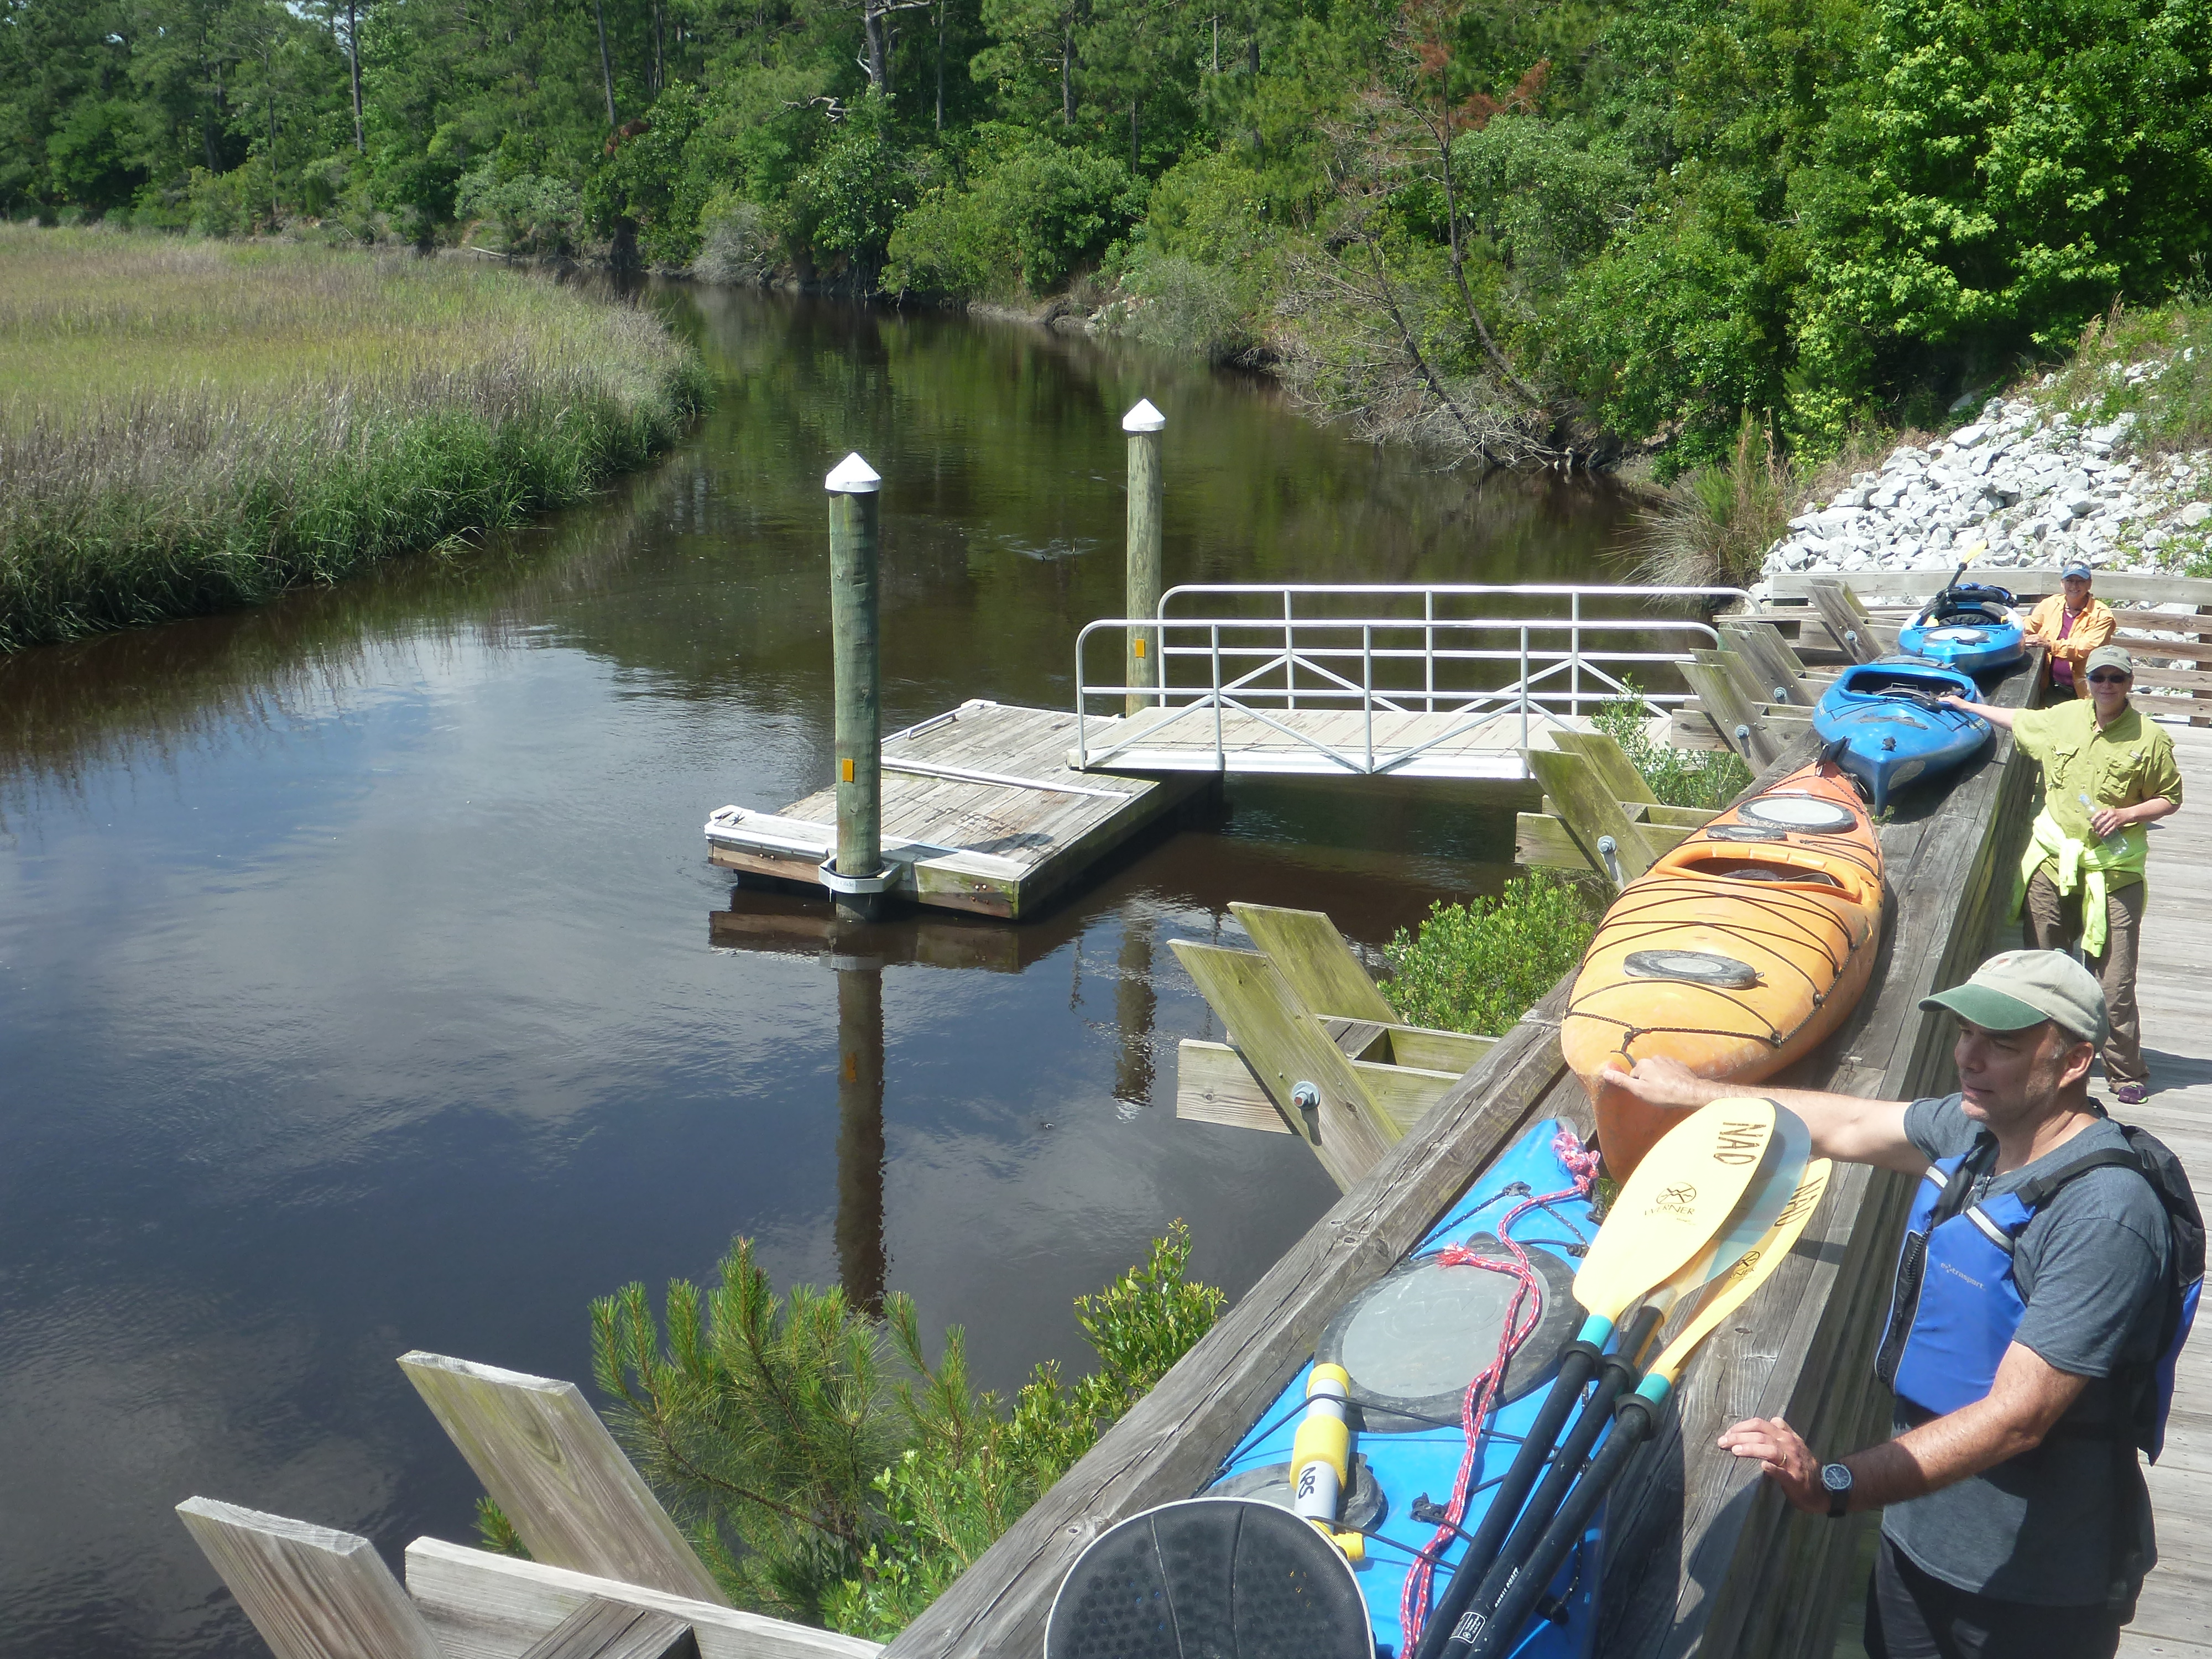 This purpose-built kayak ramp at Awendaw Creek Canoe Launch in South Carolina provides staging room for several boats, leaving the small dock (with launch assist mechanism) free for active launches.